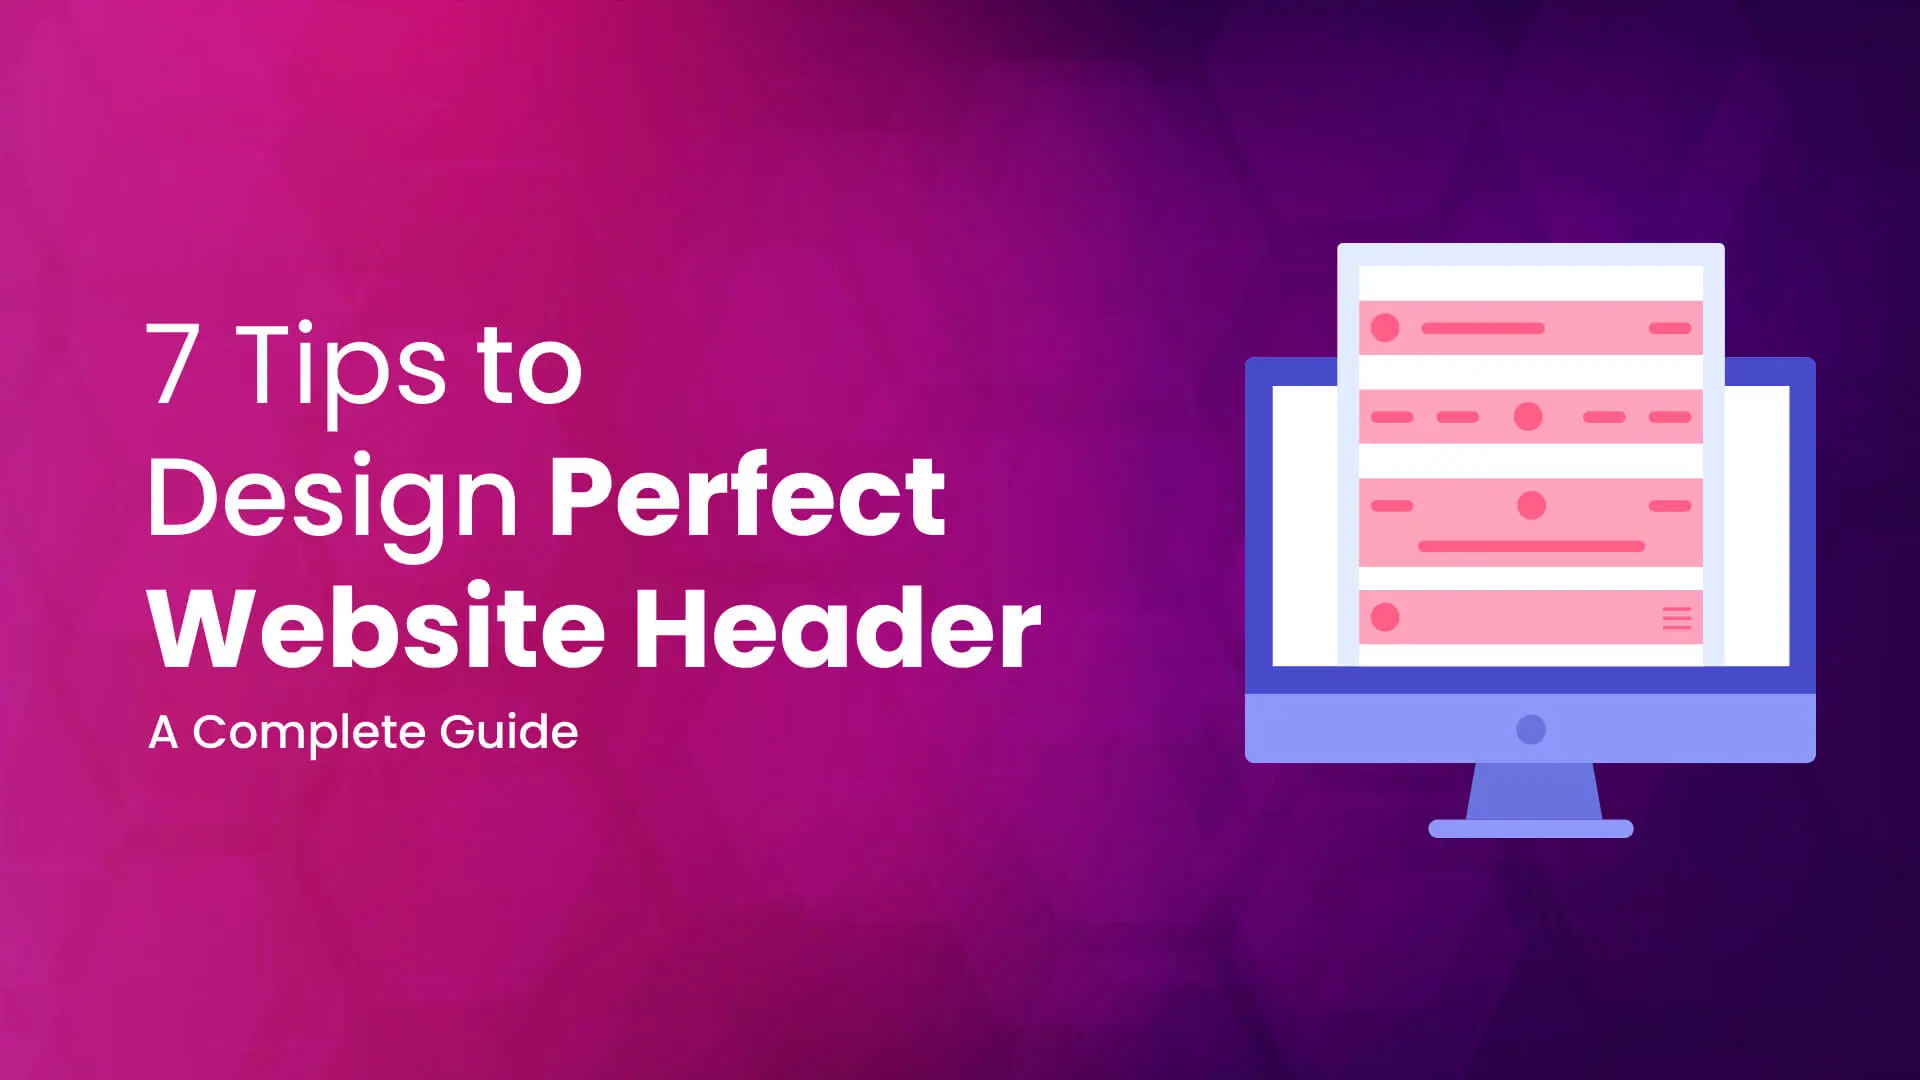 Guide to design perfect website header